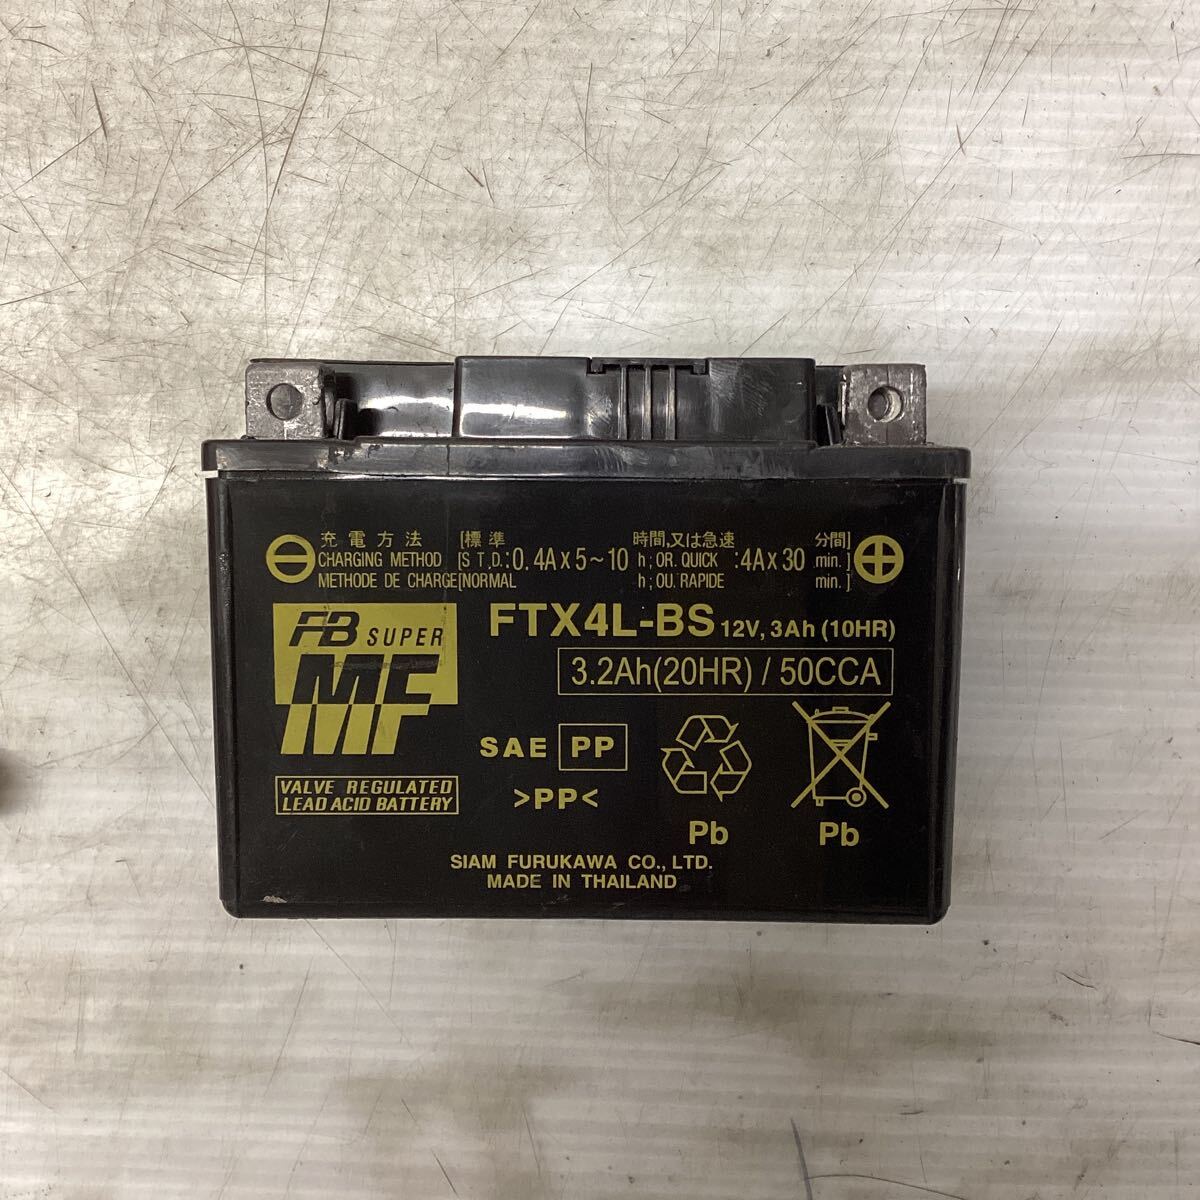 H61-1 battery for motorcycle FTX4L-BS YTX4L-BS used good goods tester .. measurement ending 